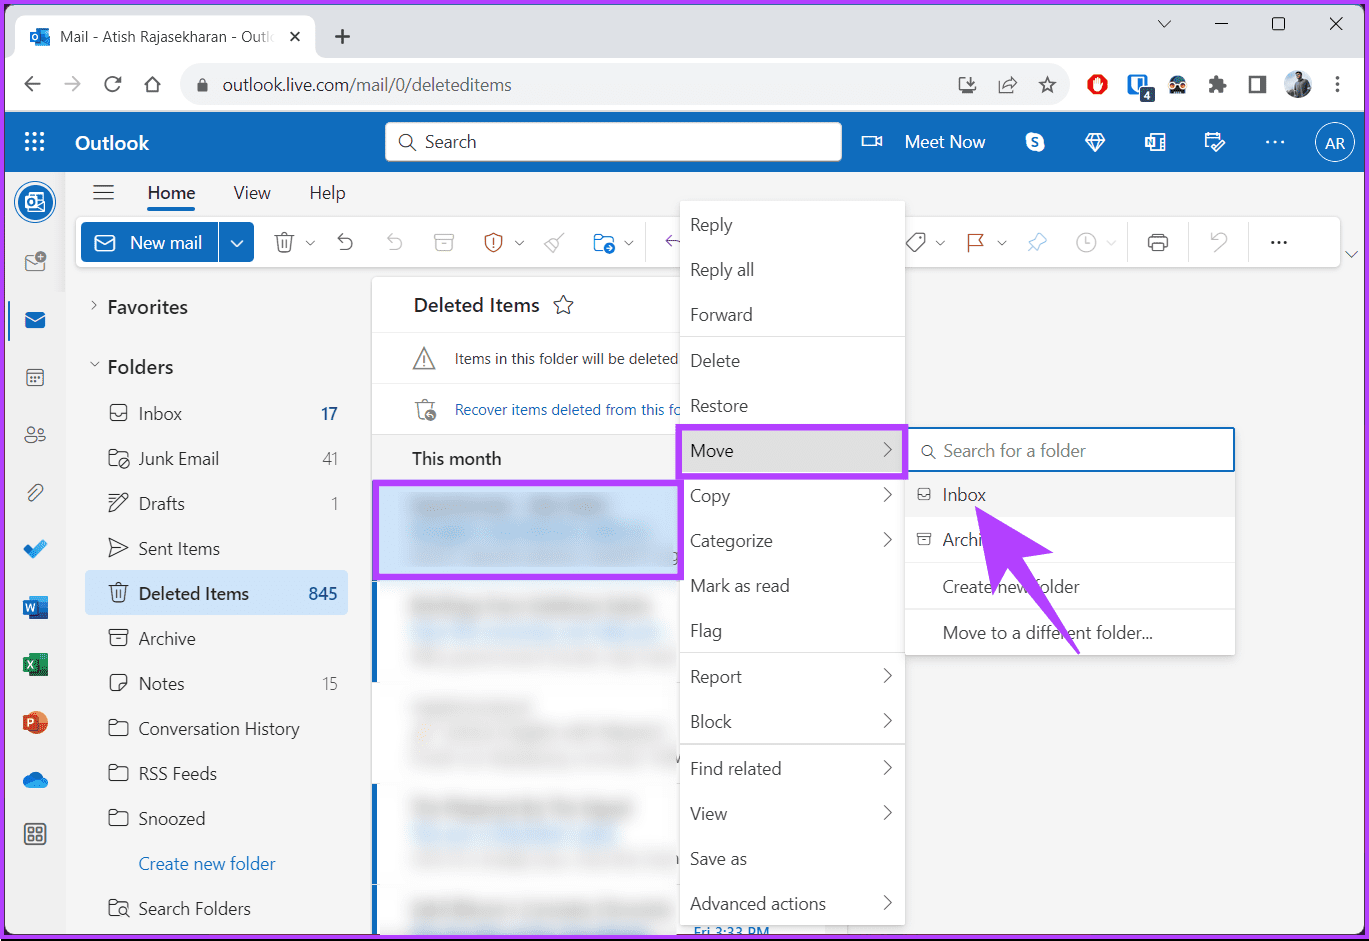 Step 3: Scroll through the items (emails or events), right-click on the folder you wish to recover from the drop-down menu, choose Move, and select the destination to restore and recover your deleted folders